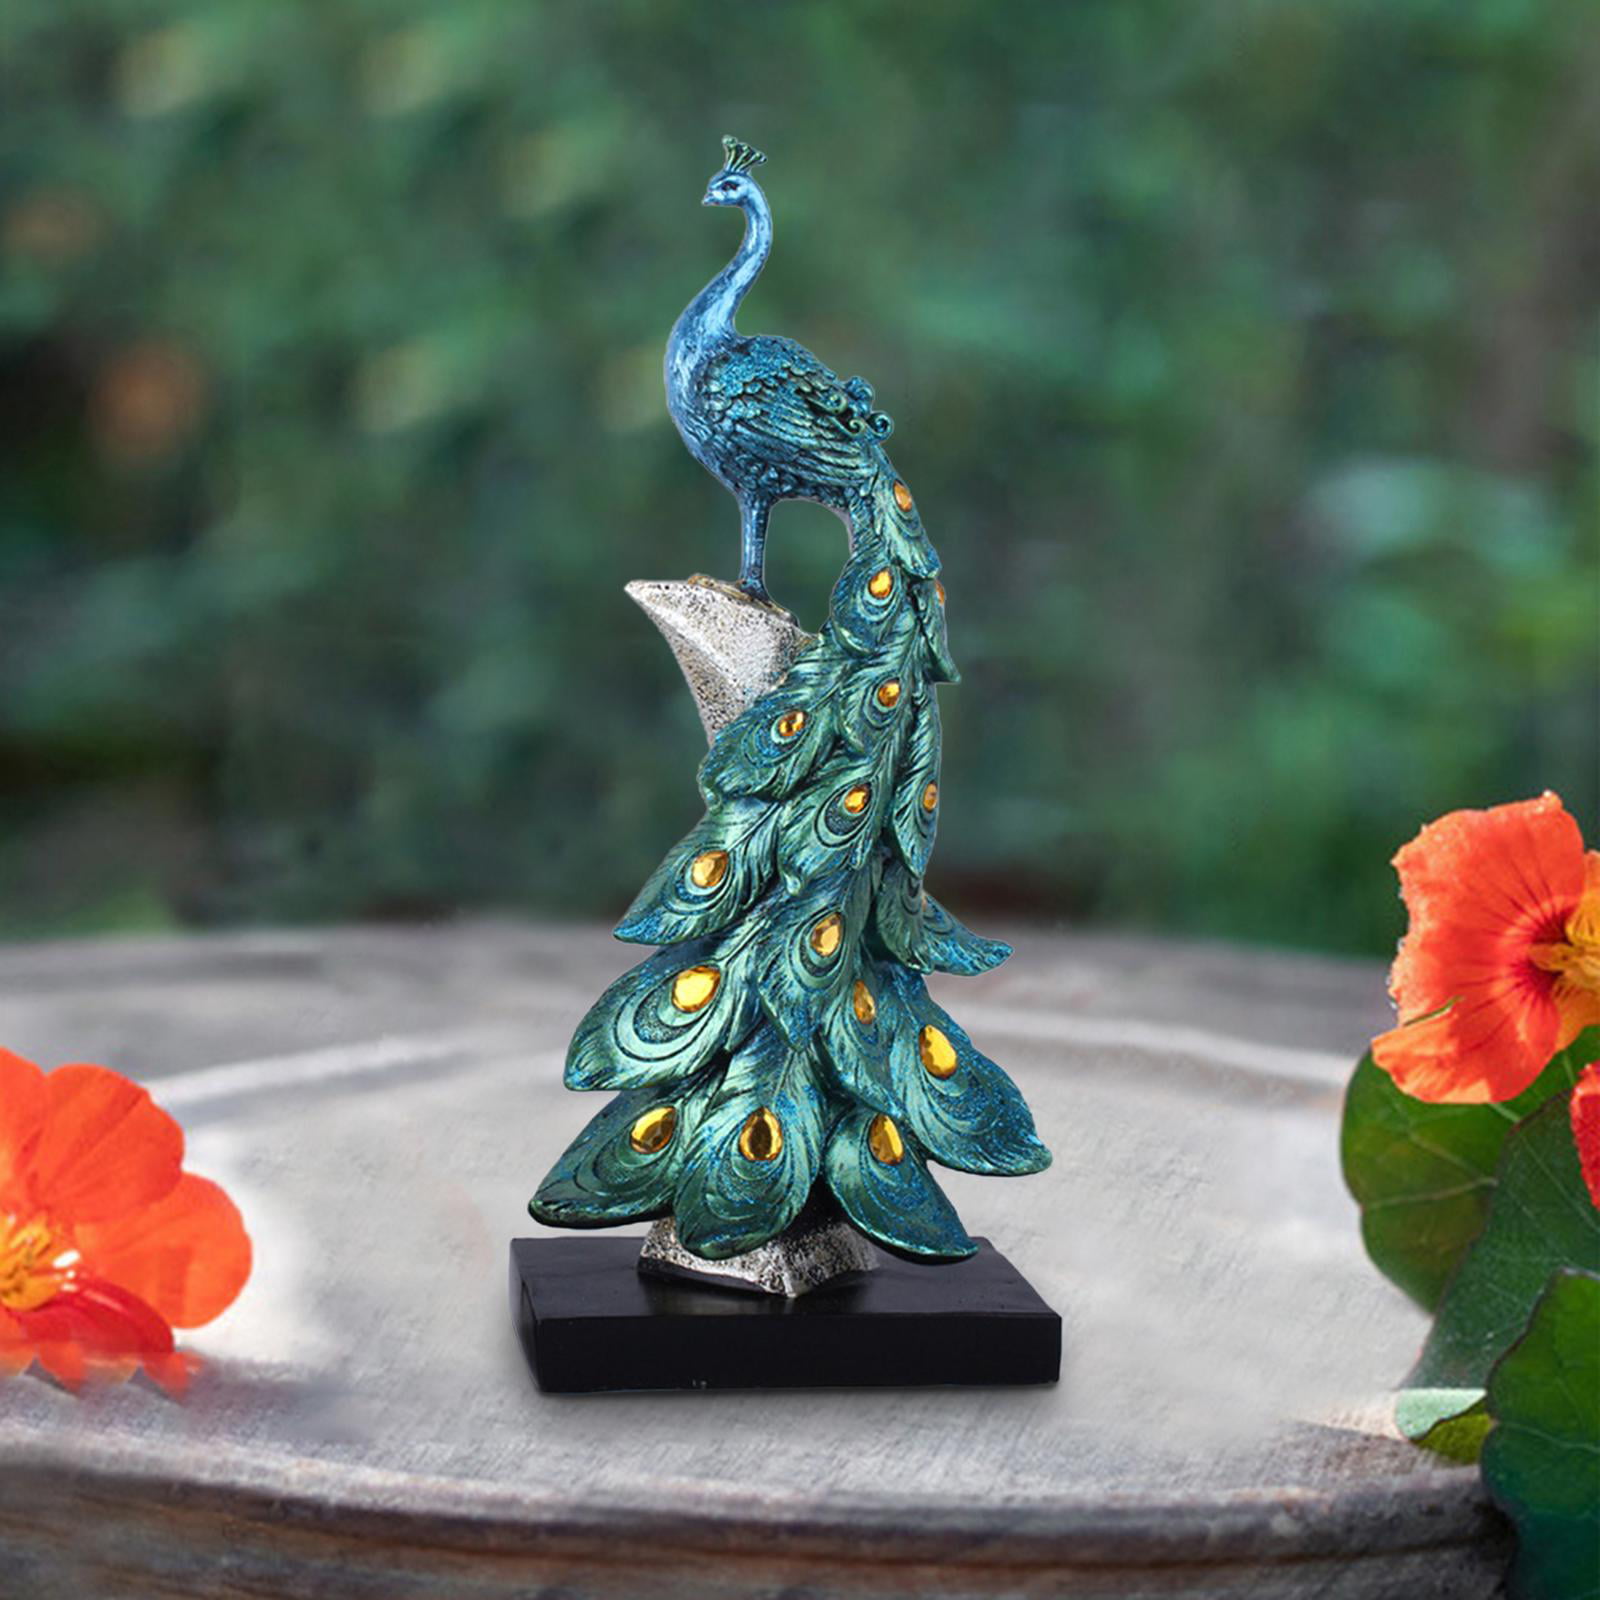 CECKQUE Elegant Blue Peacock Statue Shelf Decor Accents, Peacock Decor  Figurines Tabletop Home Decorations for Living Room, Peacock Decorative  Objects